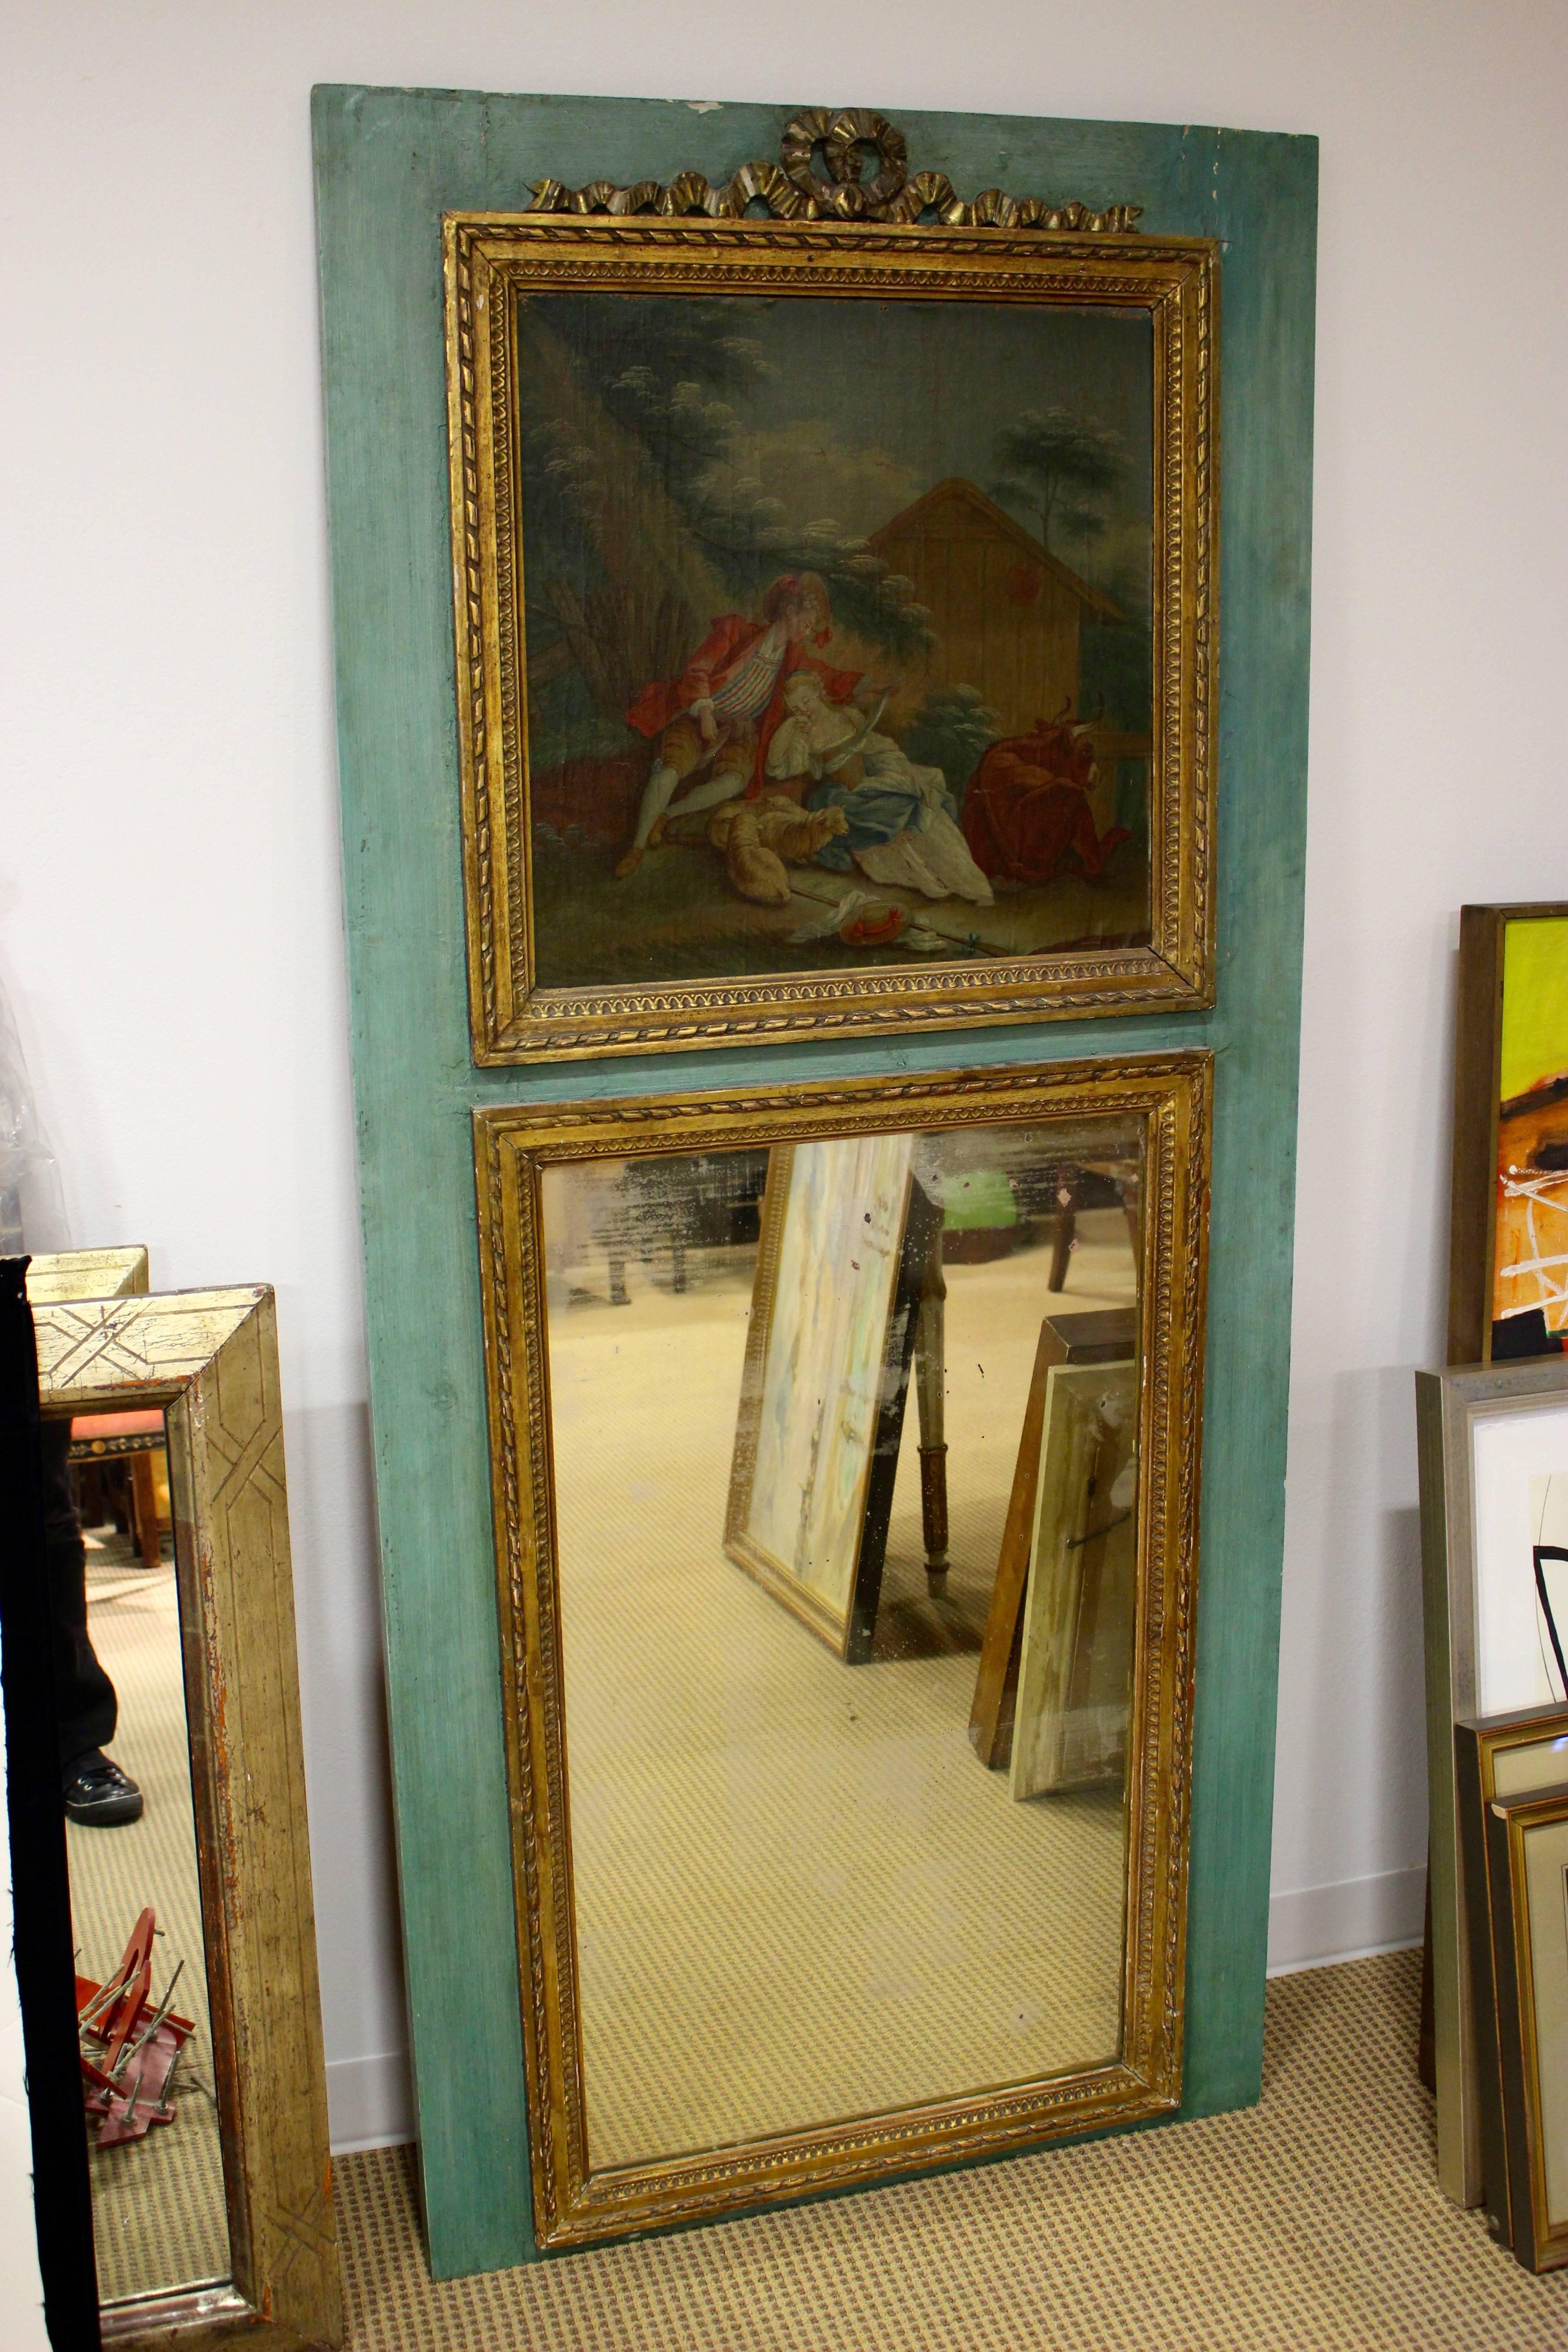 A French Louis XVI style painted trumeau mirror from the 19th century with trysting lovers painted scene and gilt accents. This exquisite Louis XVI style trumeau mirror features a blue/green background, allowing the exquisite painted scene and gilt